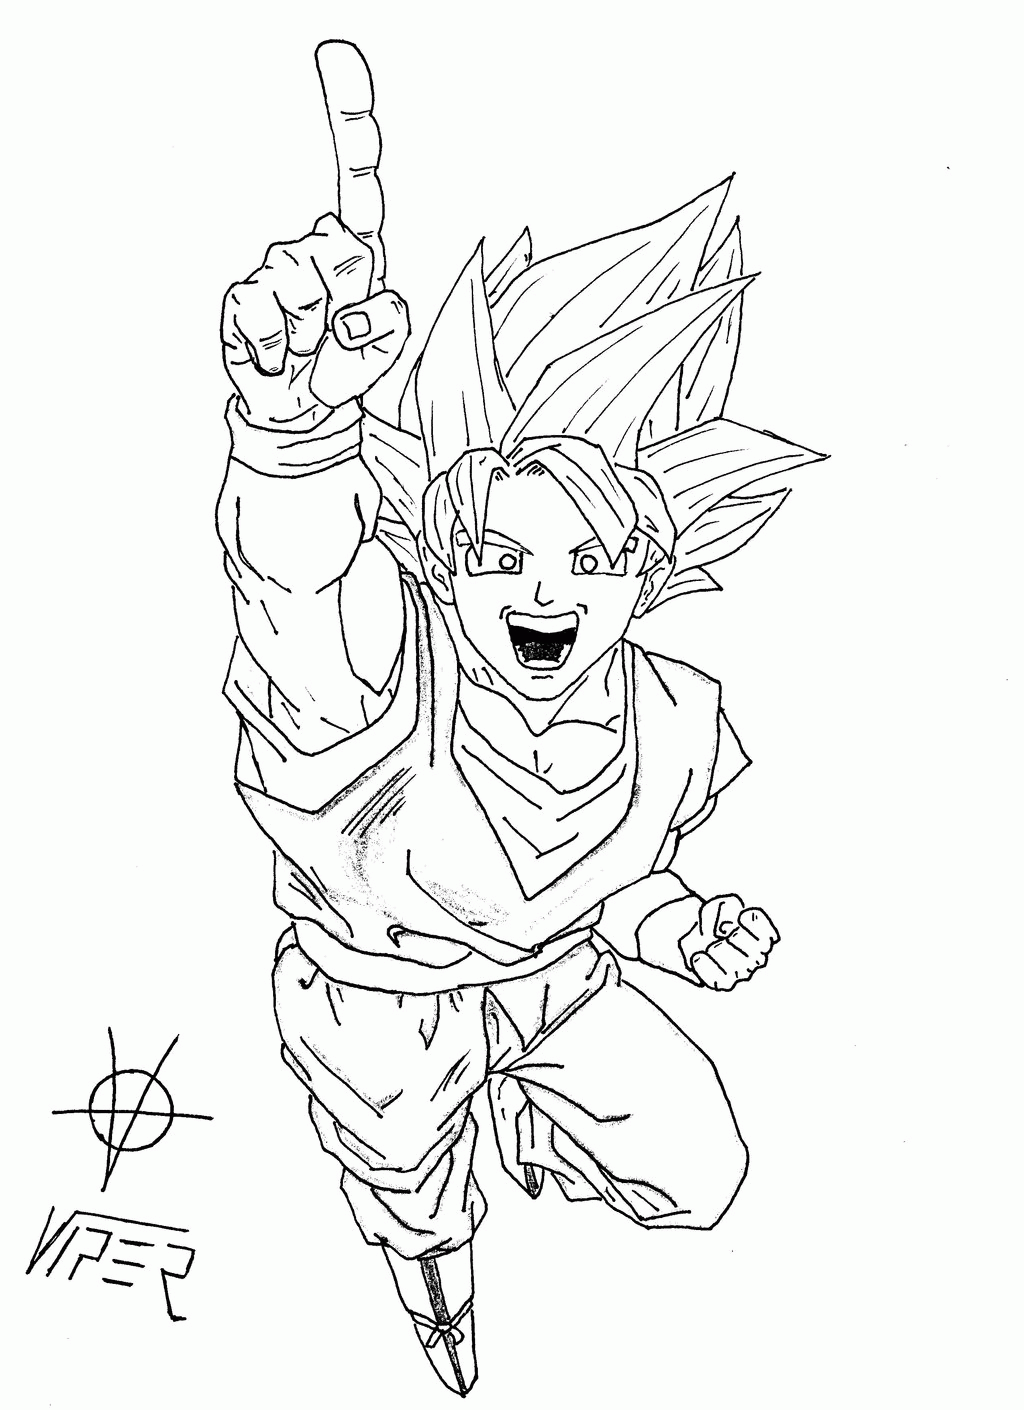 Dbz Goku Ssj4 Coloring Pages - Coloring Home